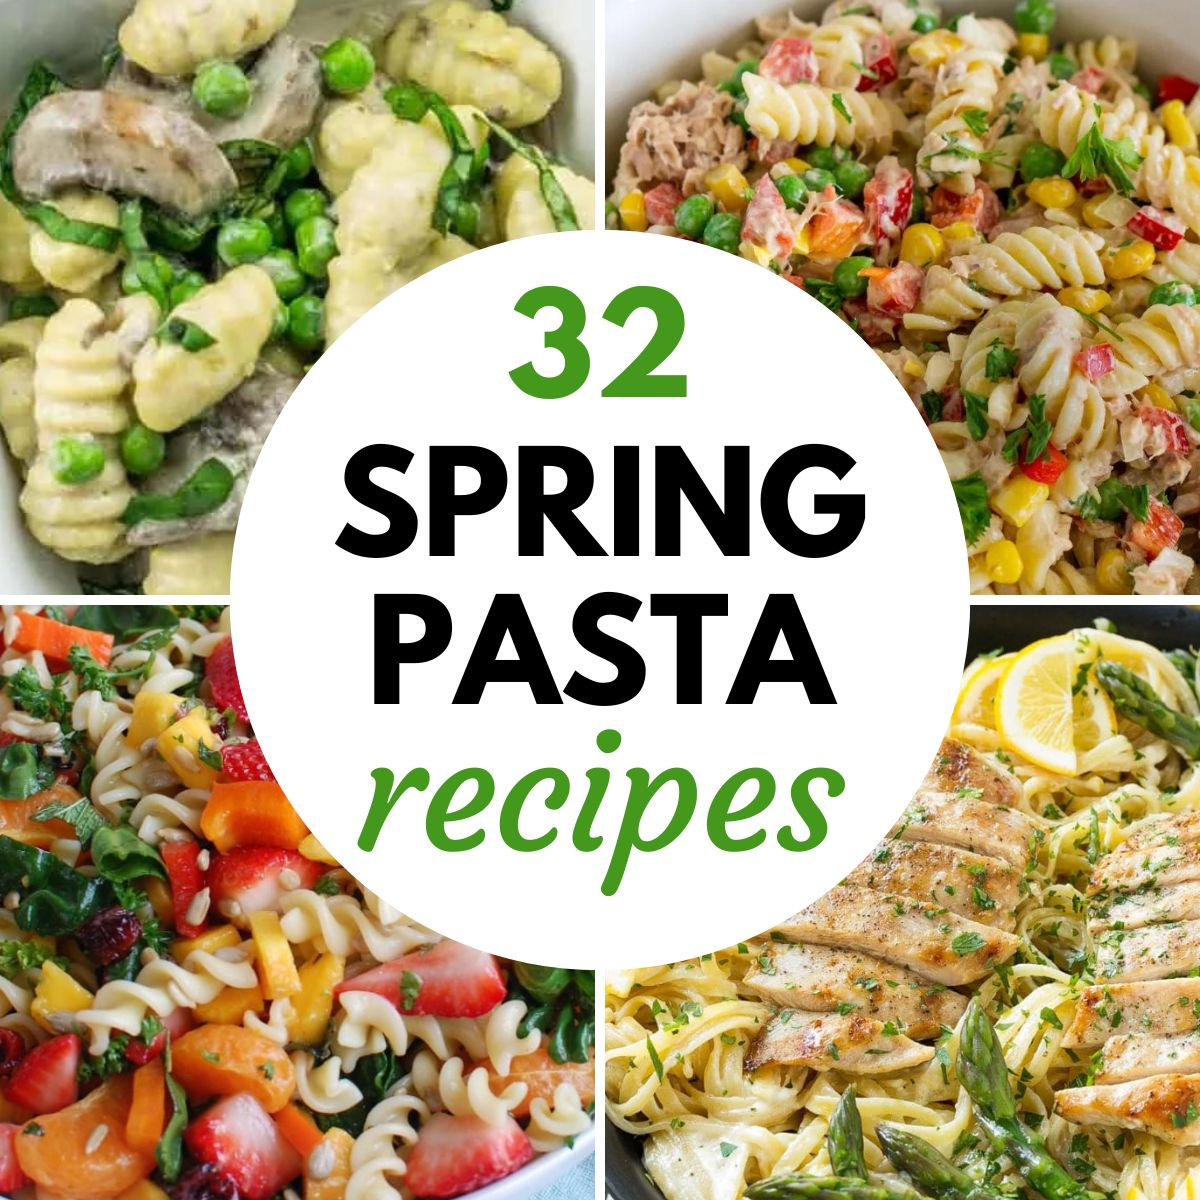 Image graphic with text that reads "32 Spring Pasta Recipes" and a collage of spring pasta dishes.